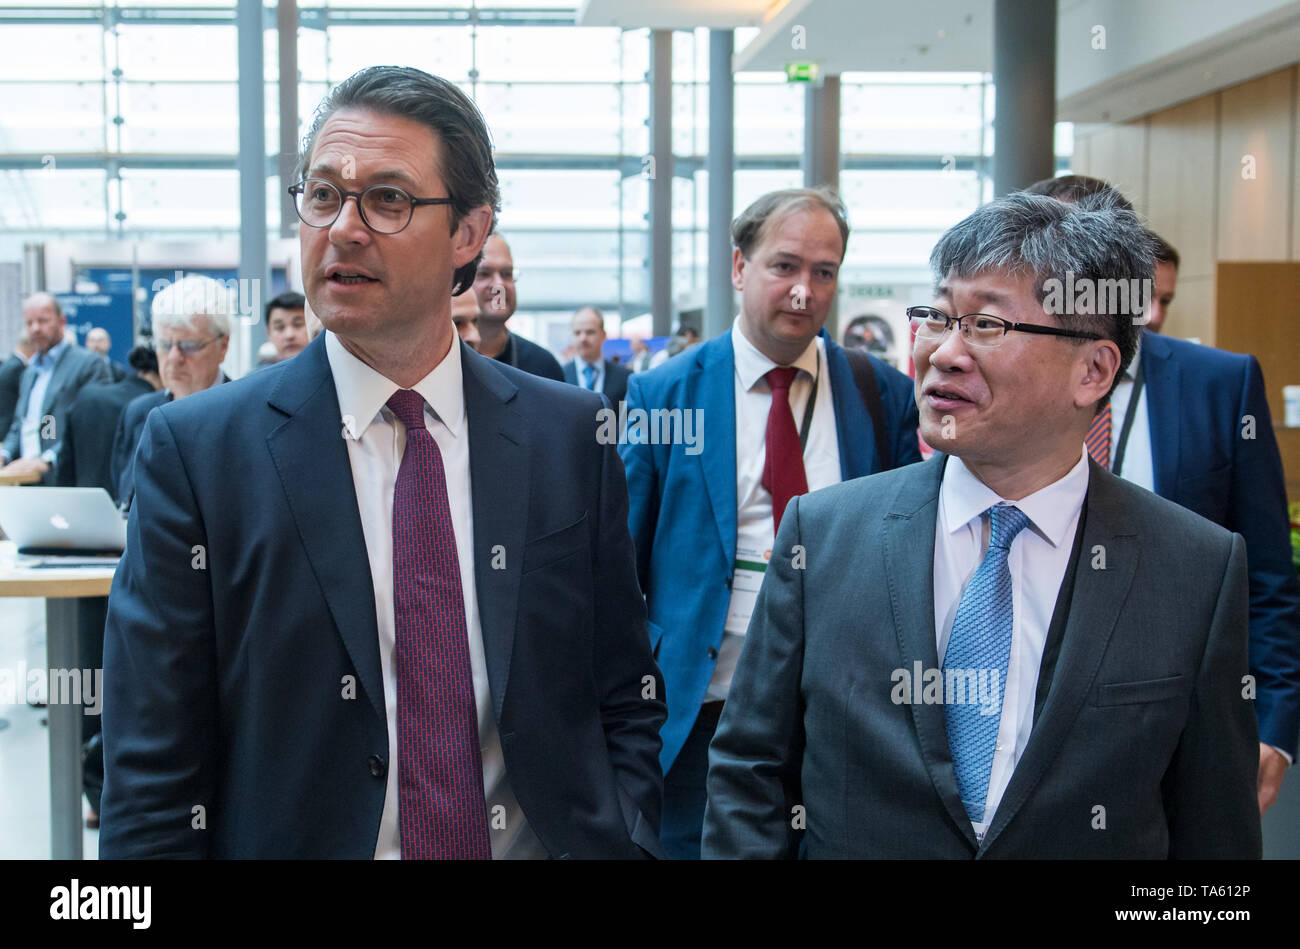 Leipzig, Germany. 22nd May, 2019. Andreas Scheuer (CSU, l), Federal Minister of Transport, and Young Tae Kim, Secretary General of the International Transport Forum (ITF), meet at the beginning of the International Transport Forum in Leipzig. Around 1300 scientists and politicians from 70 countries will discuss the mobility of the future at the International Transport Forum. This year, the three-day conference will focus on concepts that bring city and country closer together. Credit: Hendrik Schmidt/dpa-Zentralbild/dpa/Alamy Live News Stock Photo